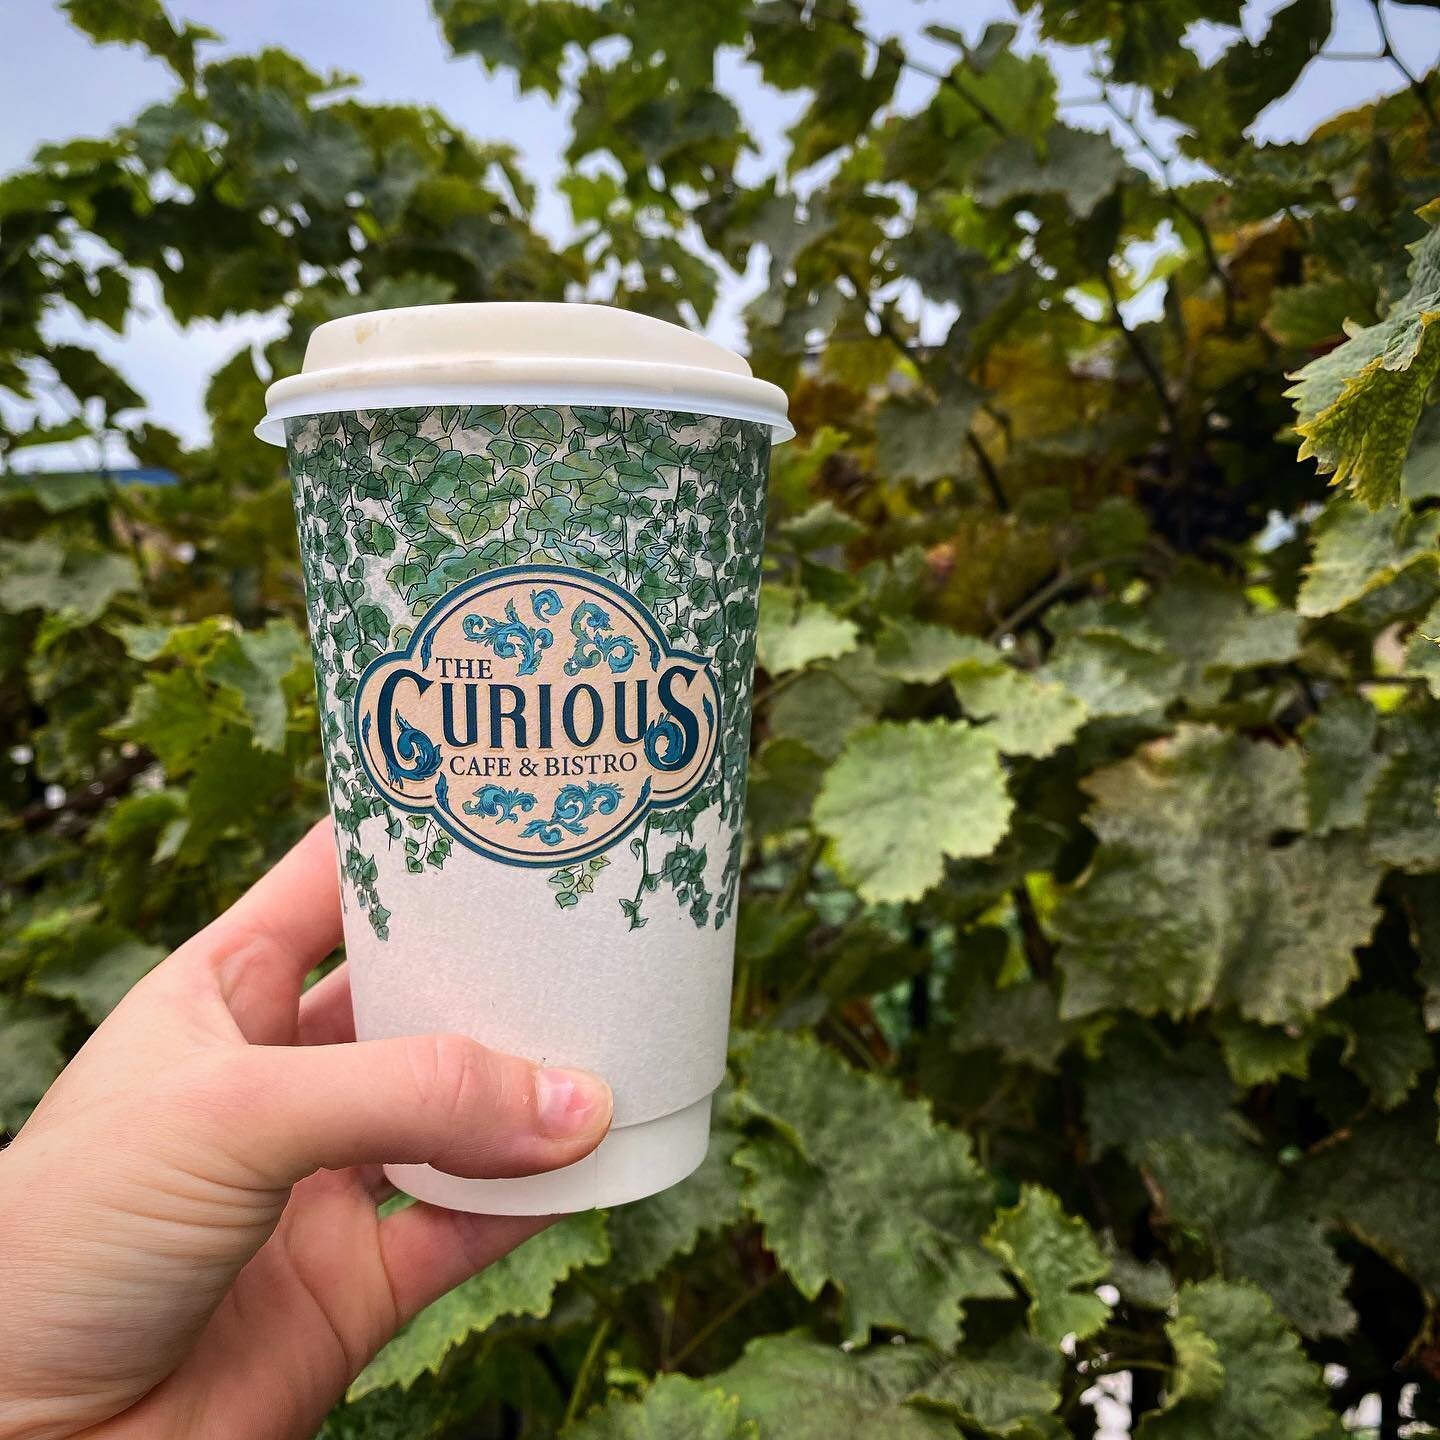 Our new takeaway cups are finally out 🍃

We are obsessed with them. @essay_studio_ has truly captured our garden into this design. We absolutely love them!!! They are also fully recyclable. 

Now time to work on 1000 other items 😂

#curiouscafechel